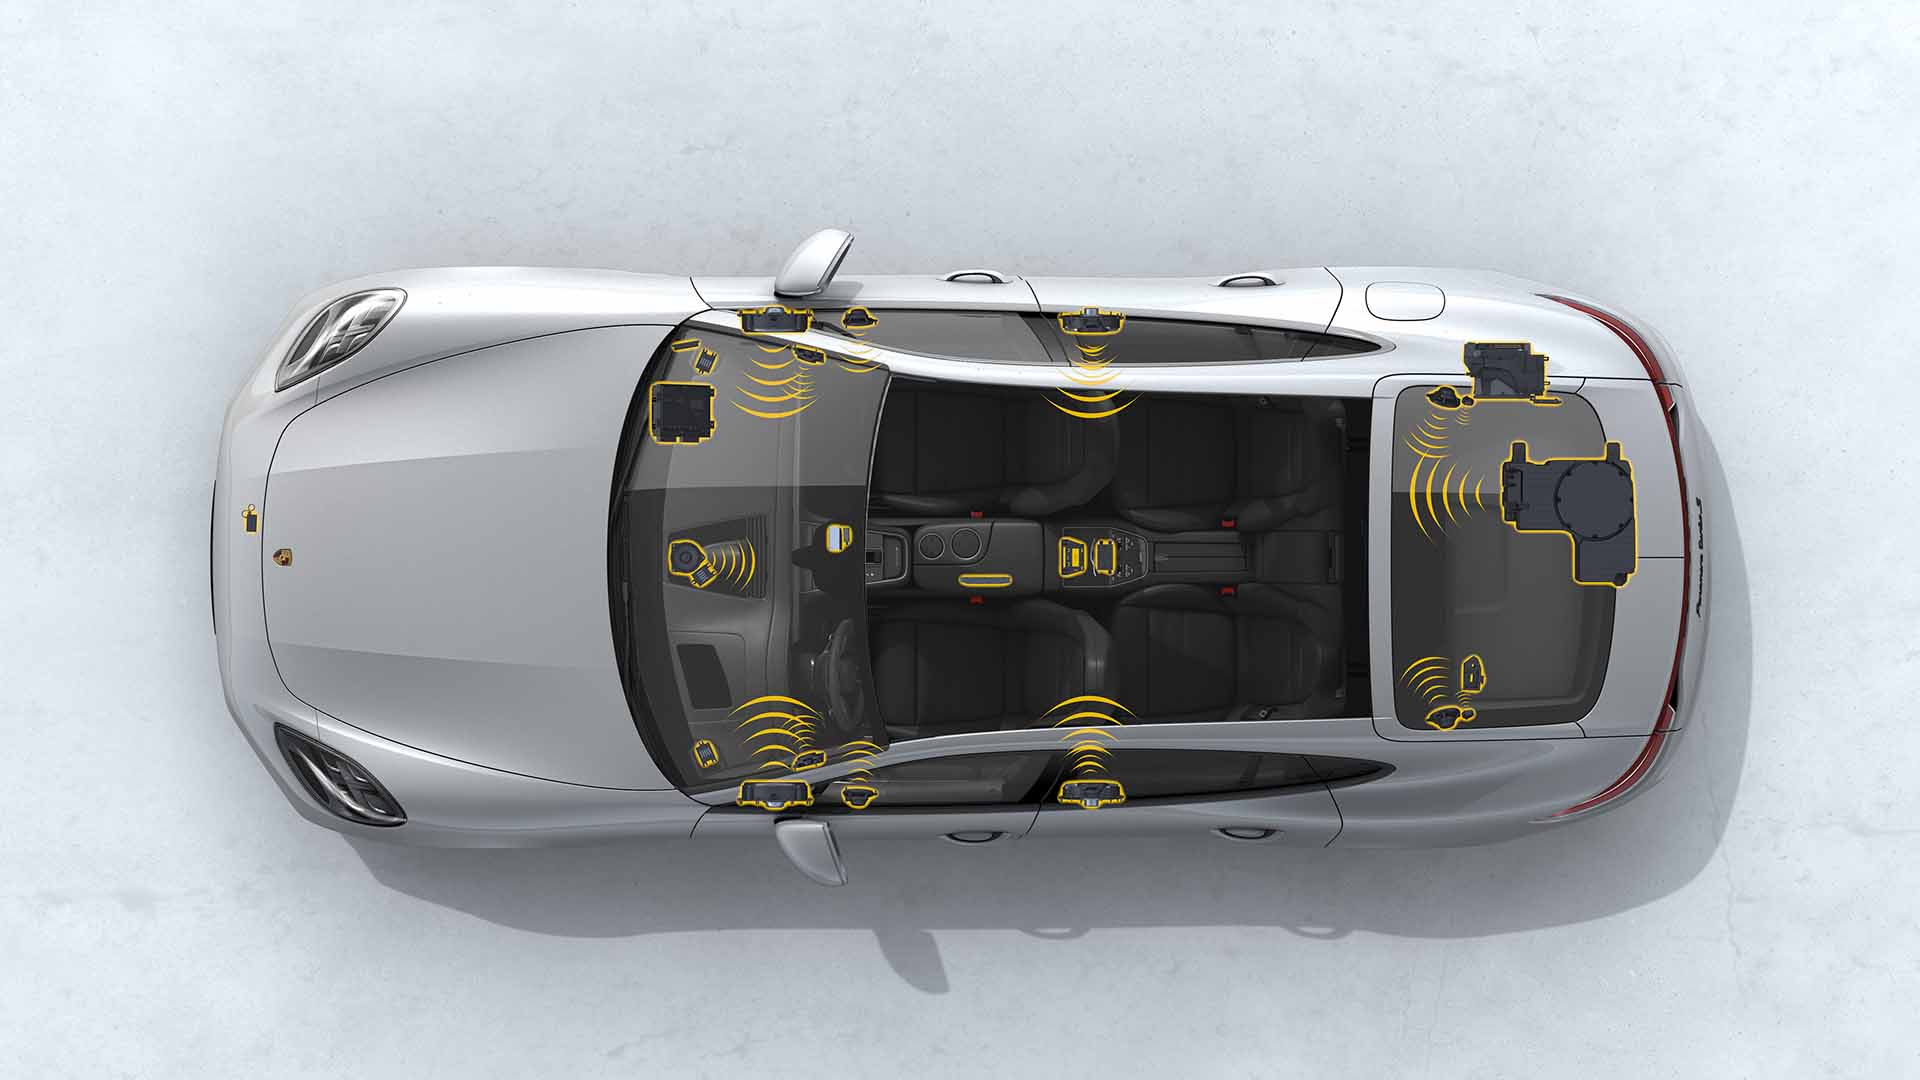 The car systems - Motoring Research